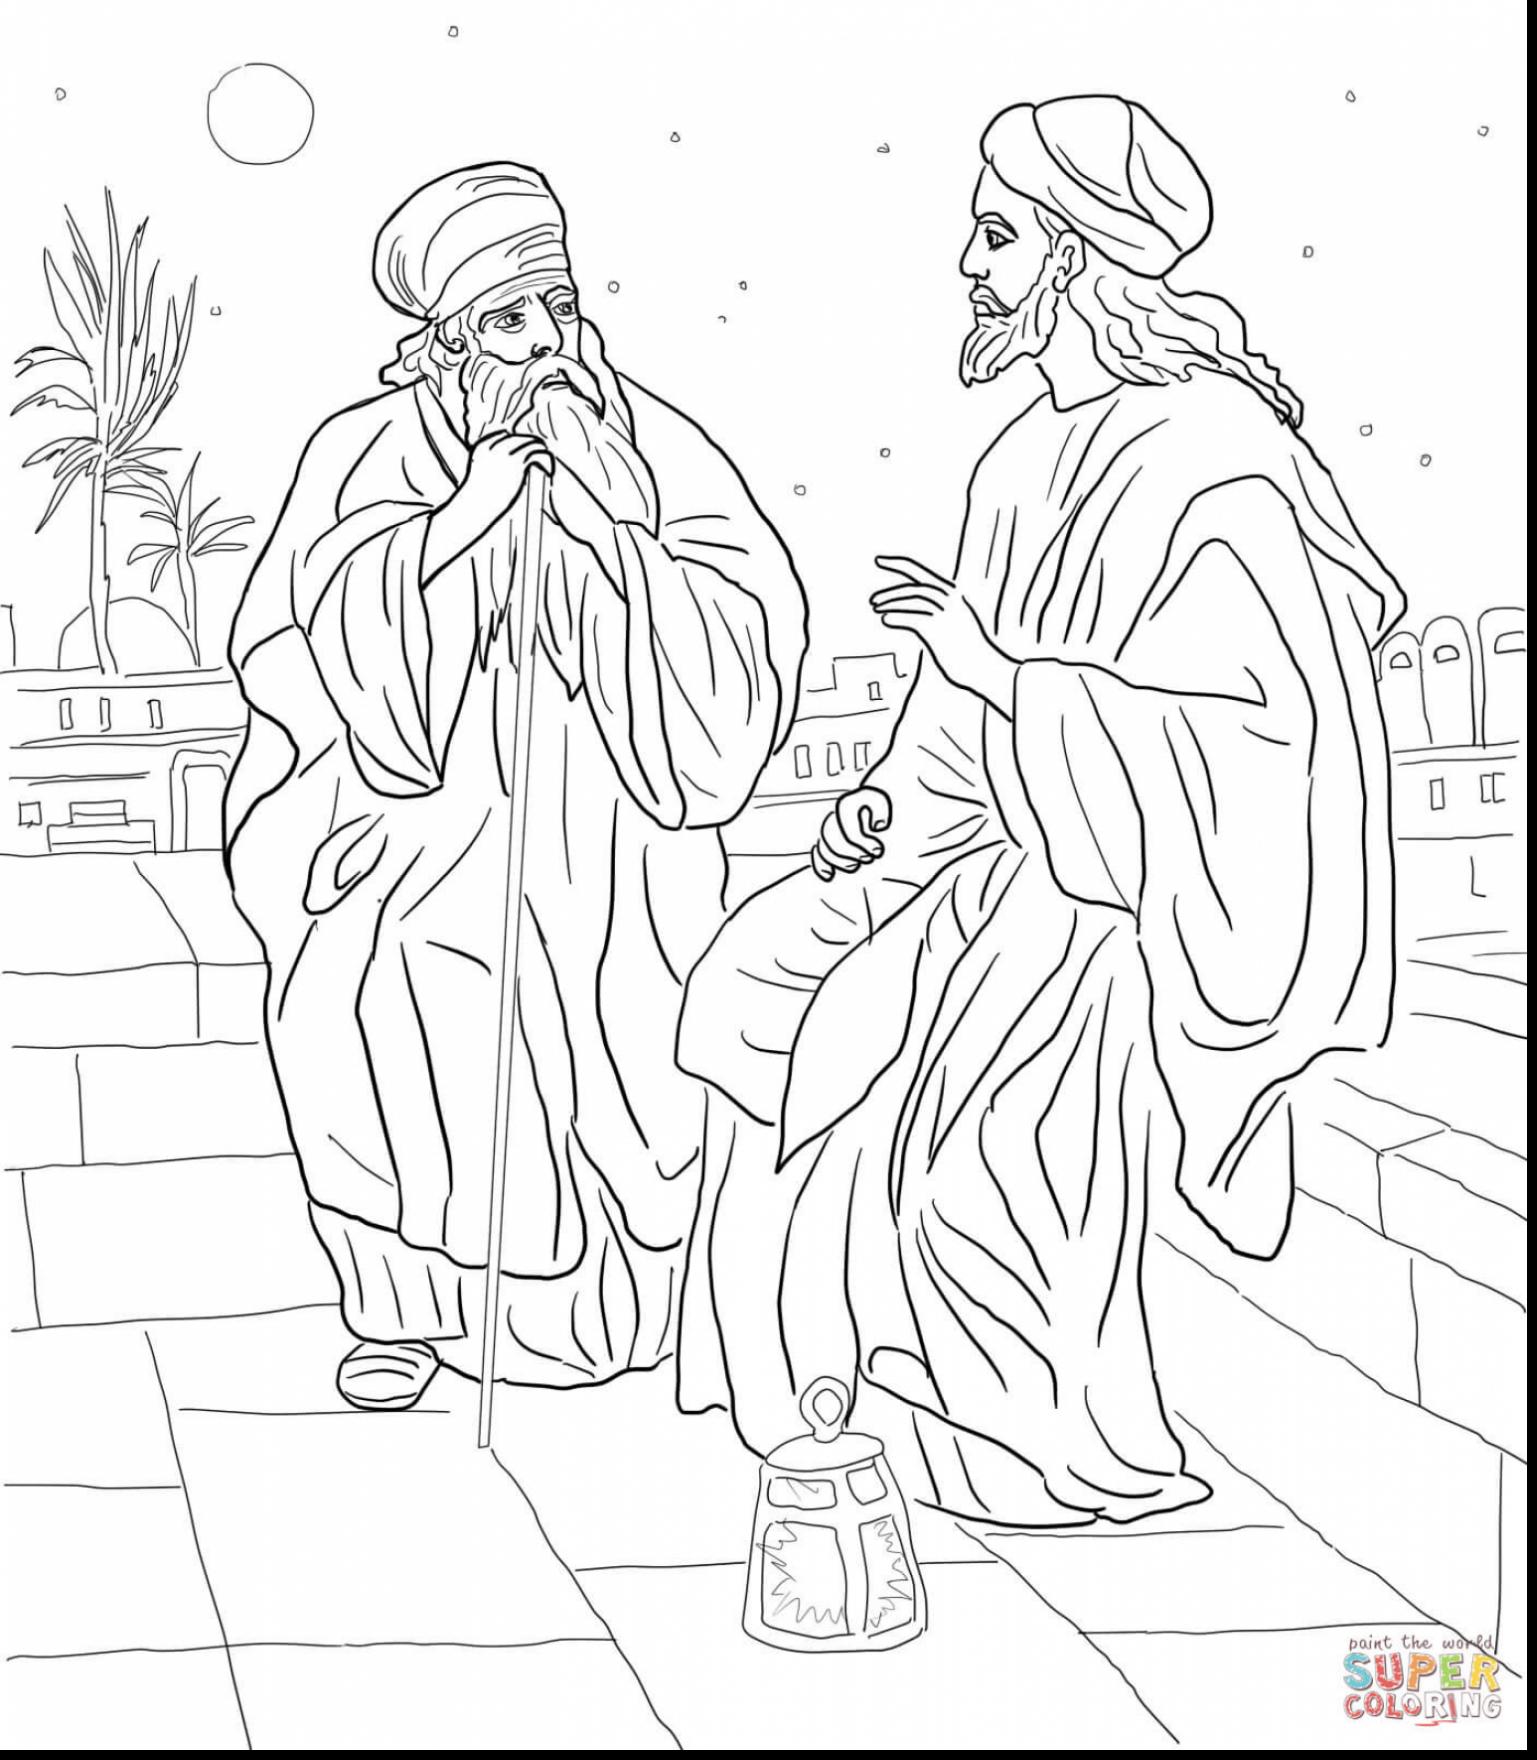 The best free Zacchaeus coloring page images. Download from 67 free